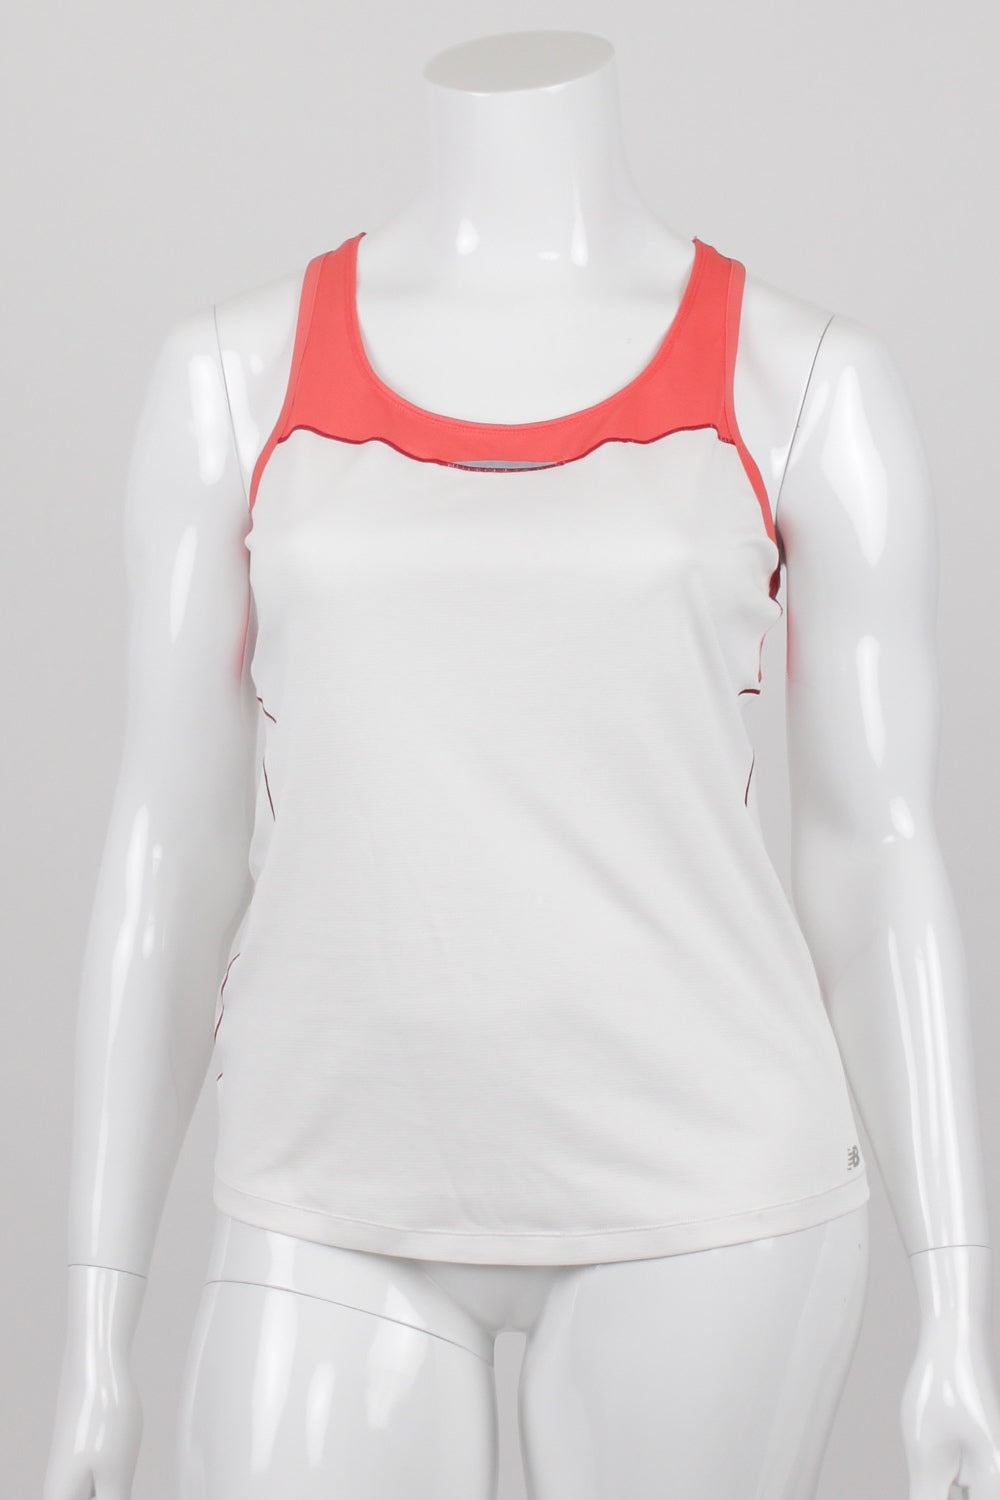 New Balance White and Pink Active Tank L